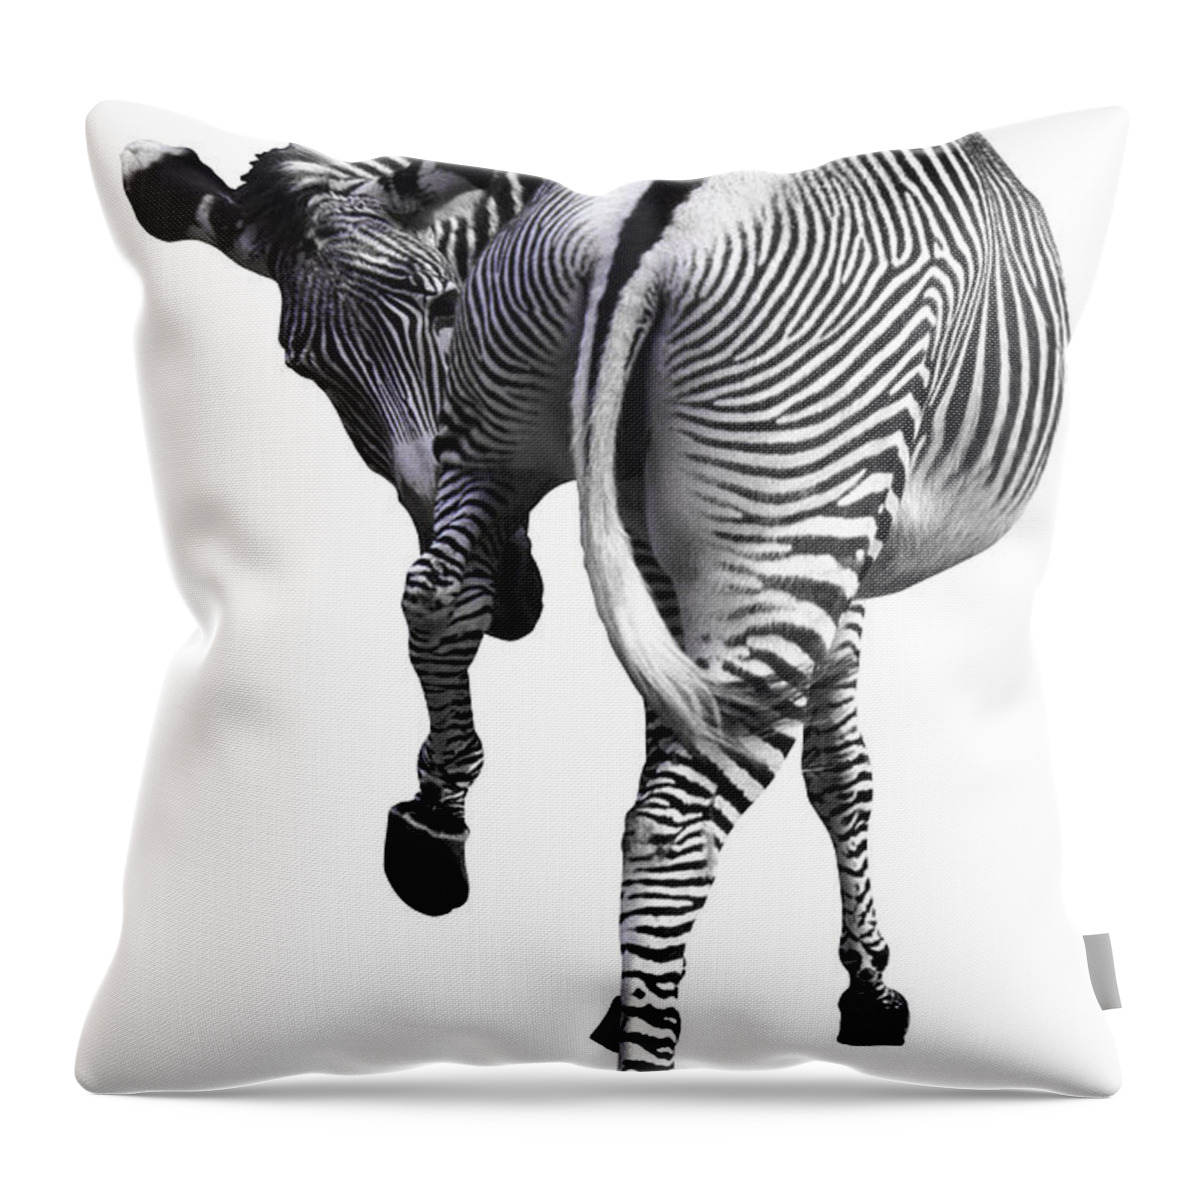 White Background Throw Pillow featuring the photograph Zebra by John Foxx